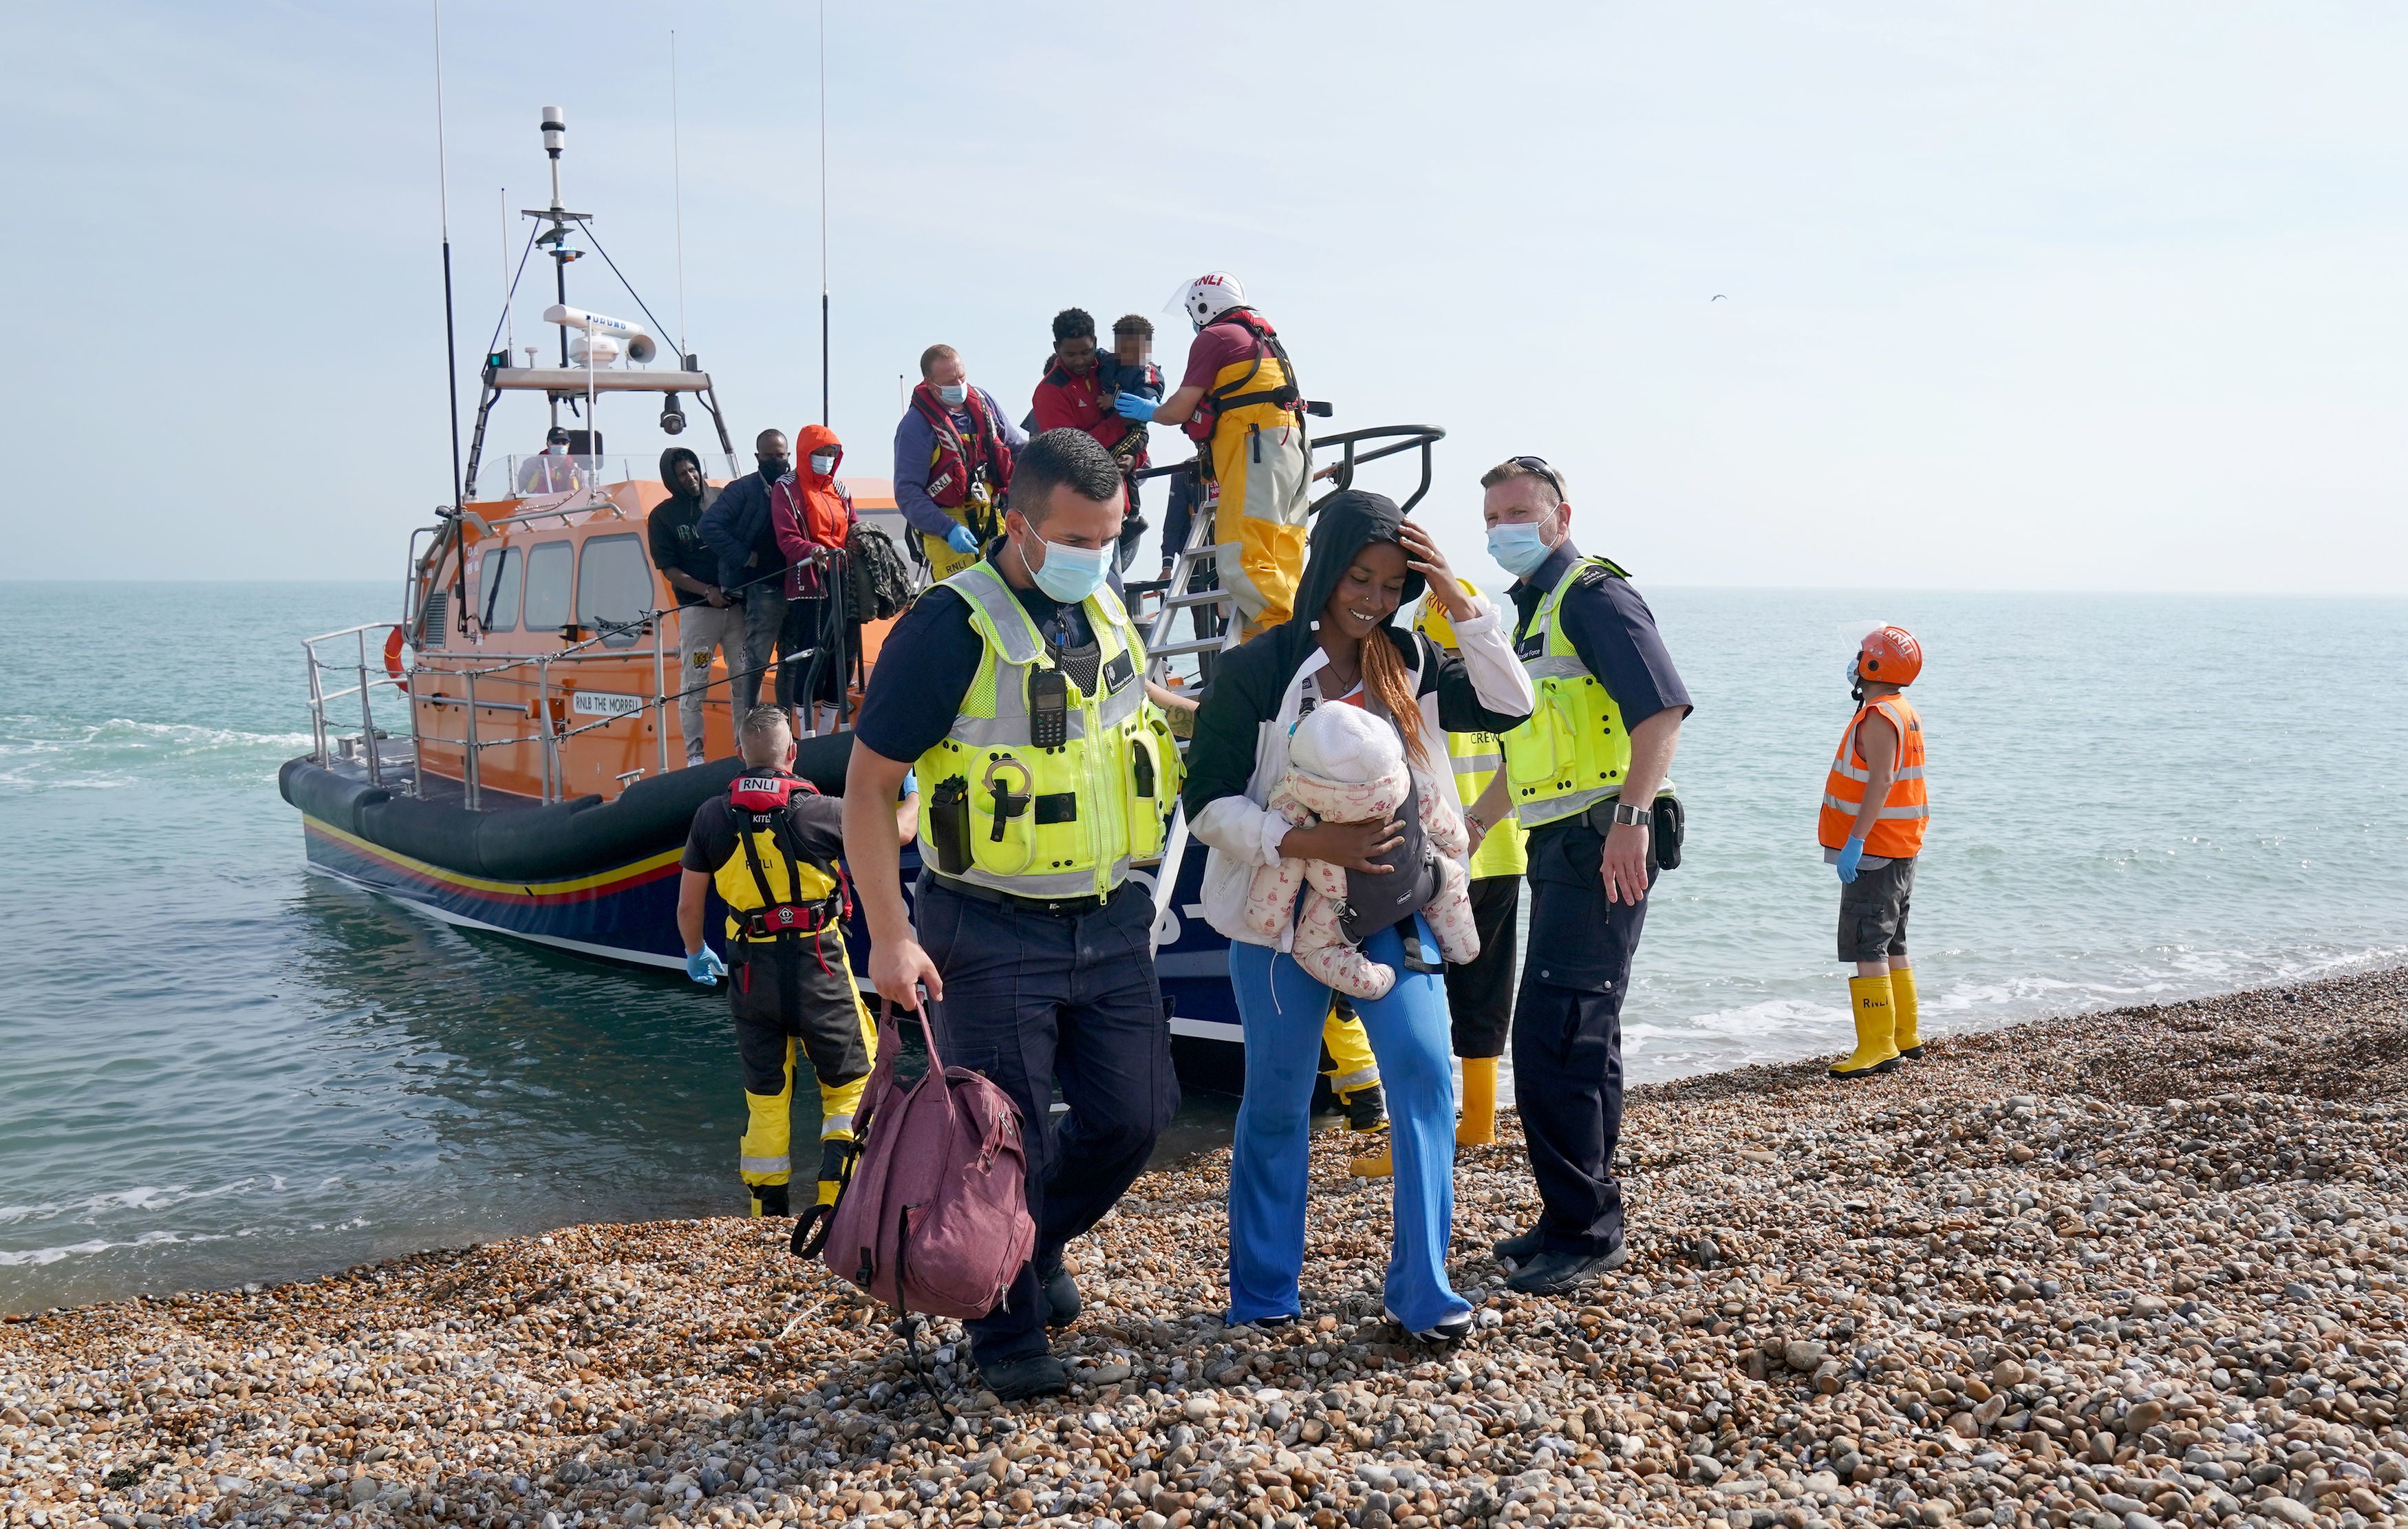 Migrants are brought ashore from the local lifeboat at Dungeness in Kent, after being picked up following a small boat incident in the Channel on 6 September 2021